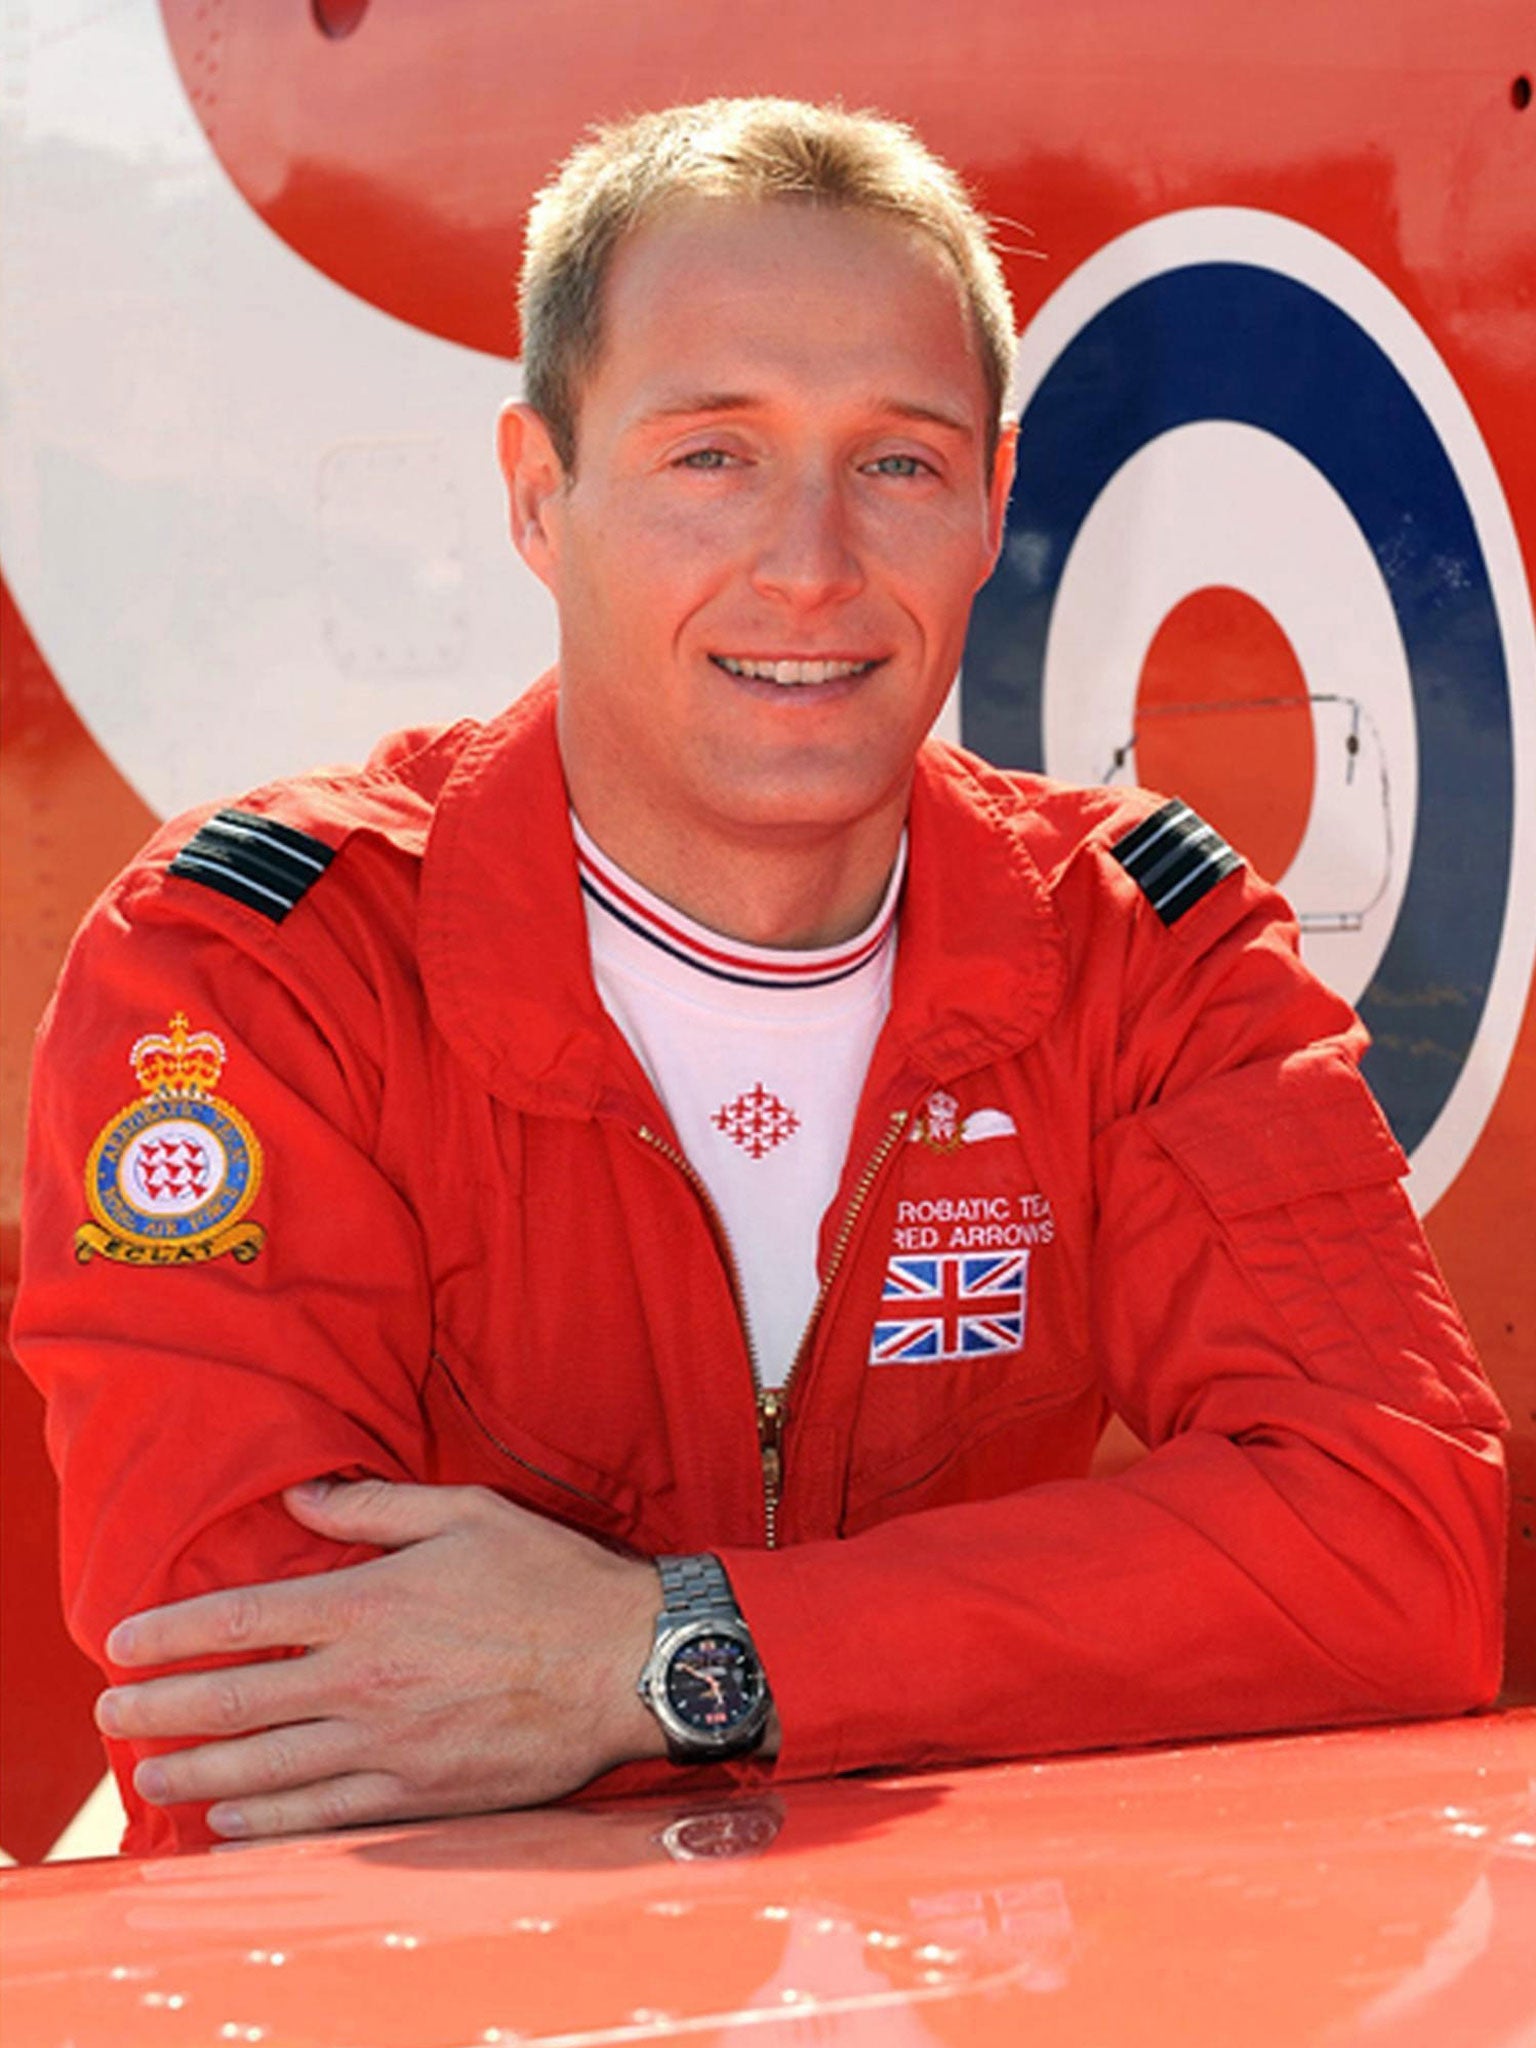 Flight Lieutenant Sean Cunningham was fatally injured after being ejected from his Hawk T1 aircraft